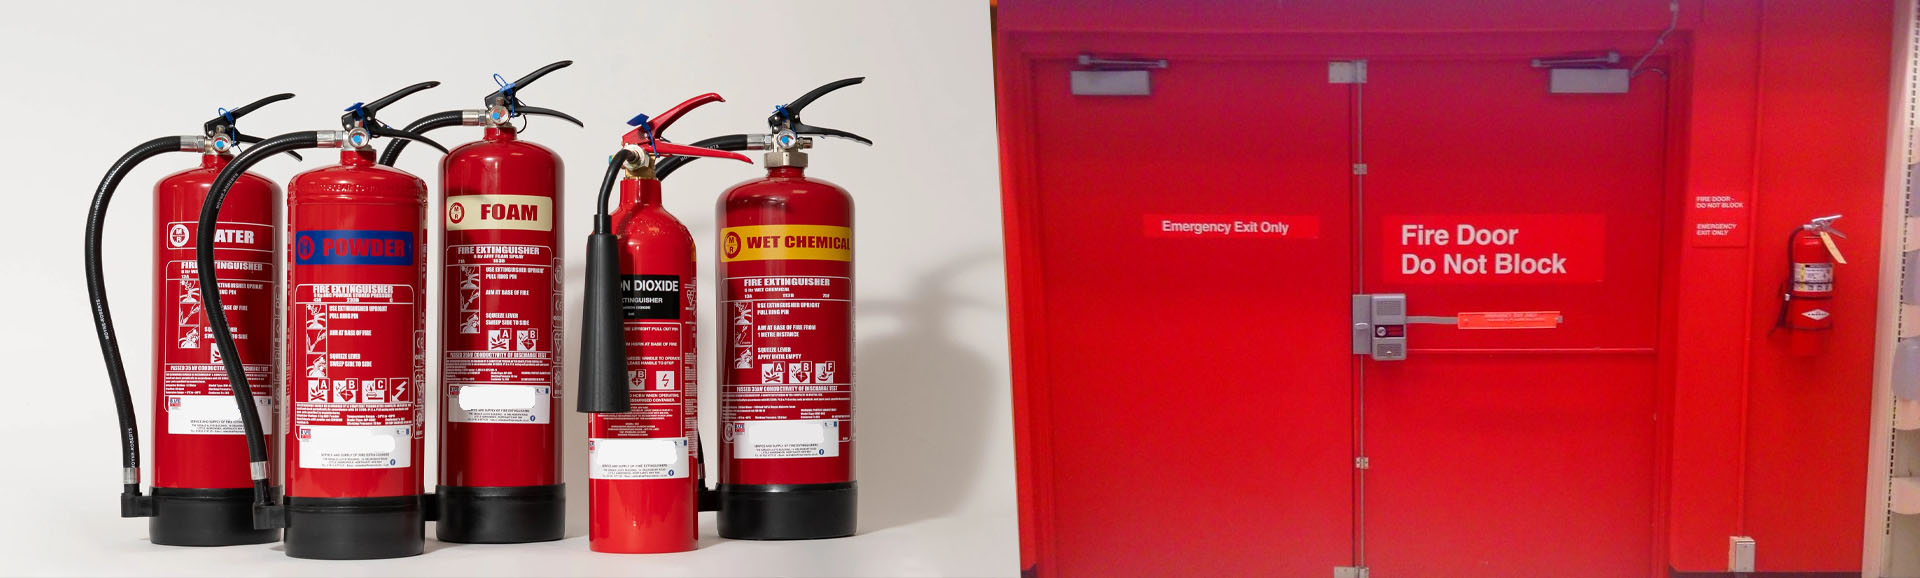 Active fire protection (fire extinguishers) vs. passive fire protection (fire doors)